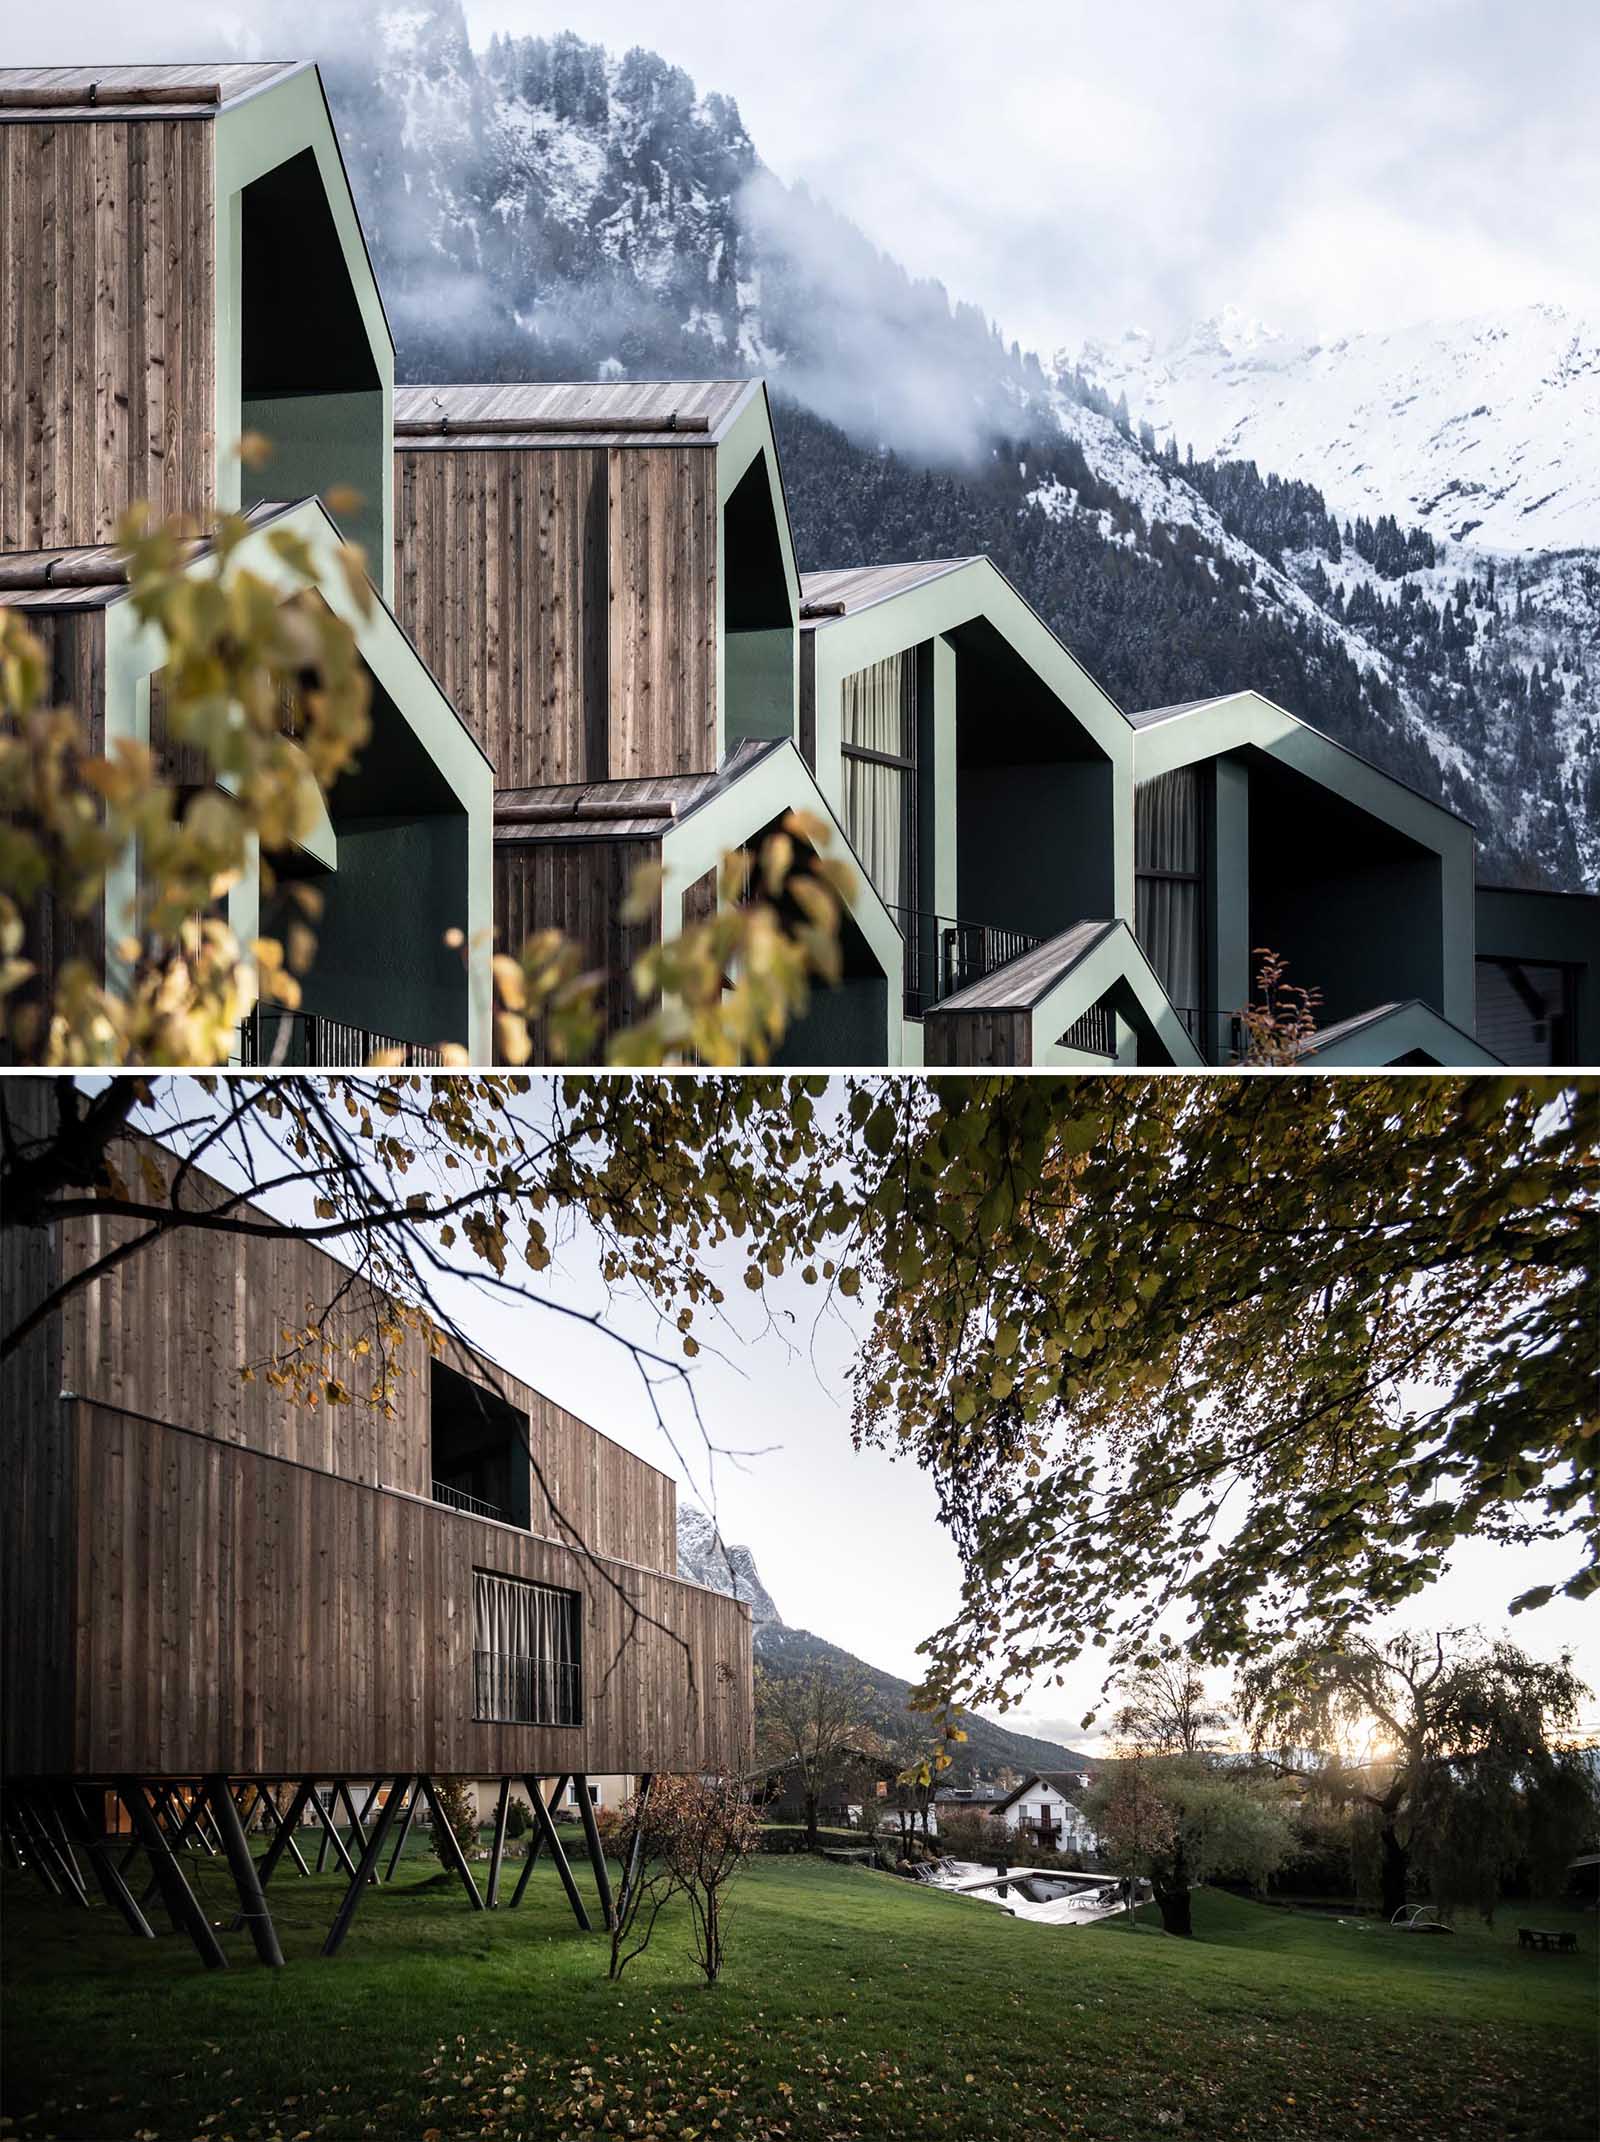 A collection of elevated hotel rooms with wood siding that are designed to look like tree houses.